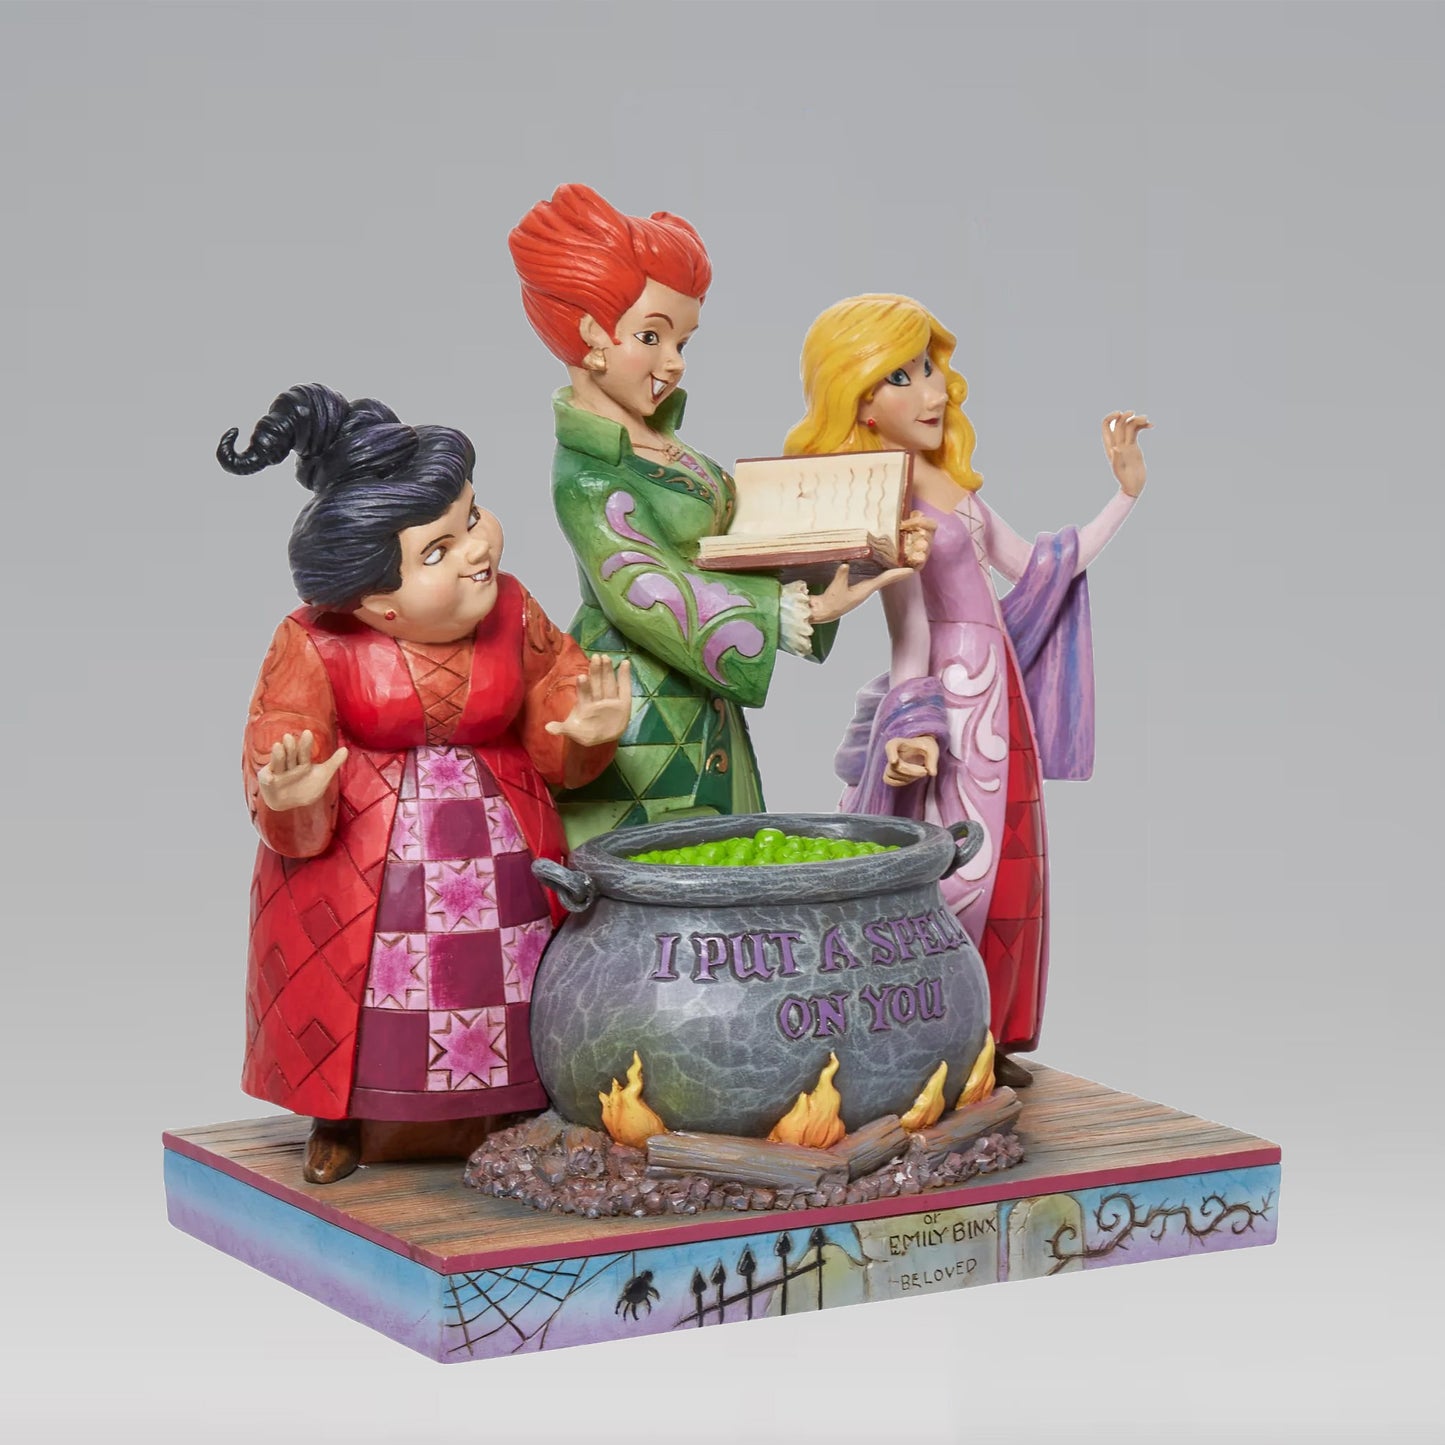 The Sanderson Sisters (Hocus Pocus) "I Put a Spell on You" Jim Shore Disney Traditions Statue